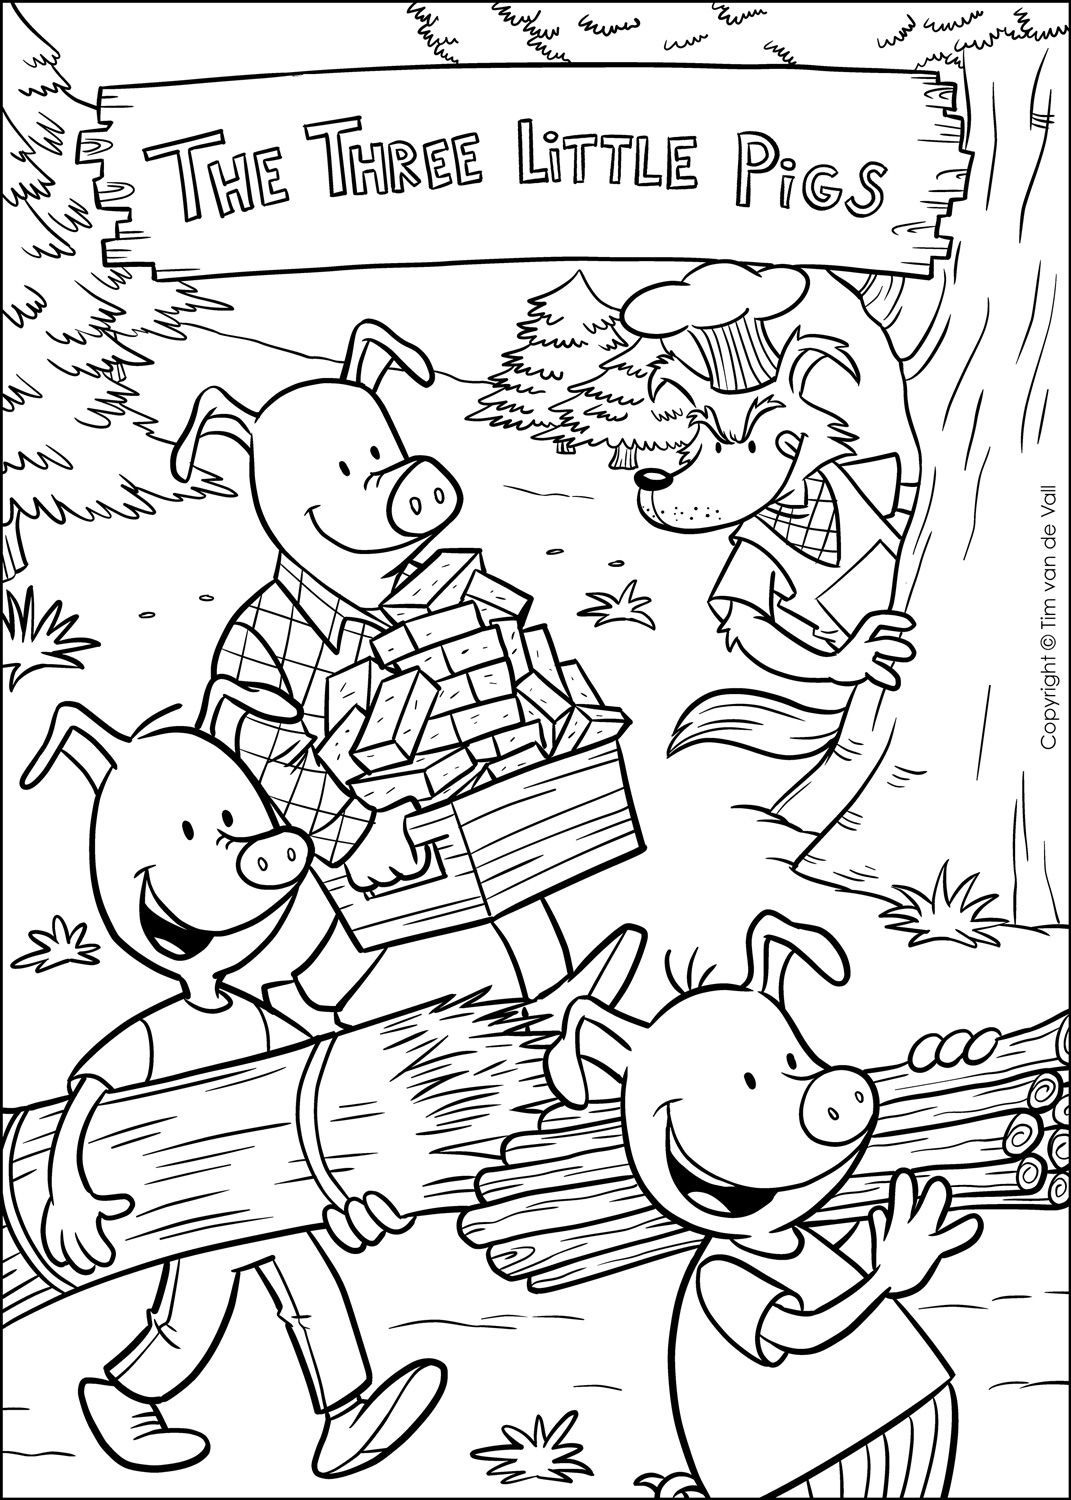 Preschool Coloring Sheets For The 3 Little Pigs Paper Plate Pig
 Three Little Pigs Coloring Page Cover 1071×1500